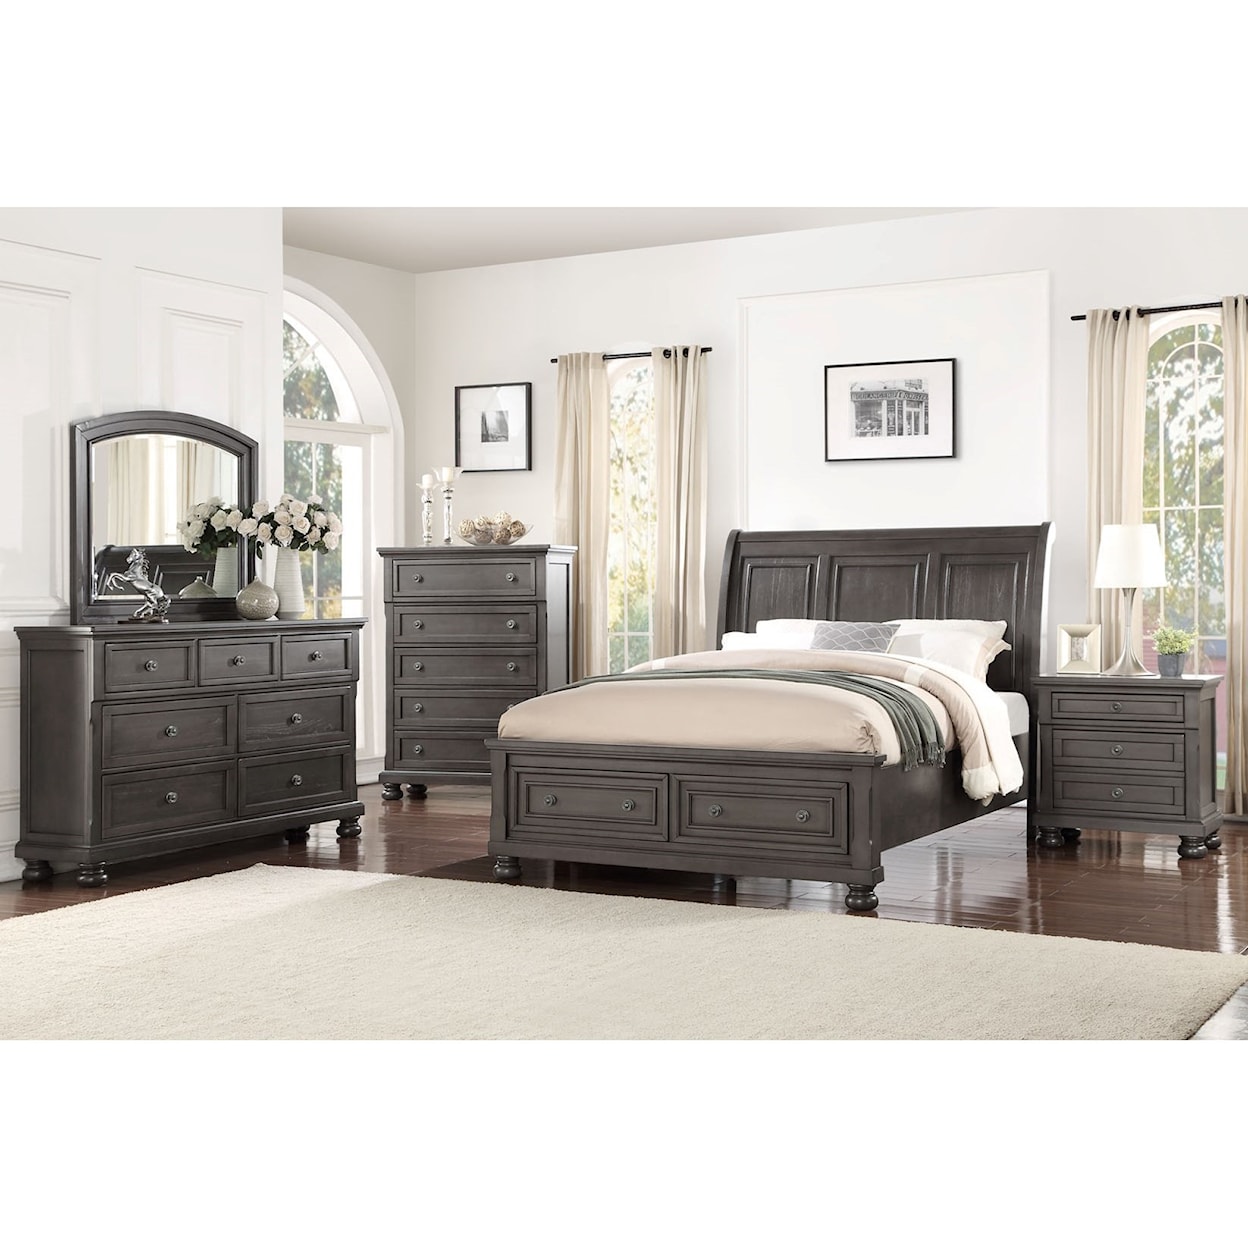 Avalon Furniture Stella Queen Bedroom Group